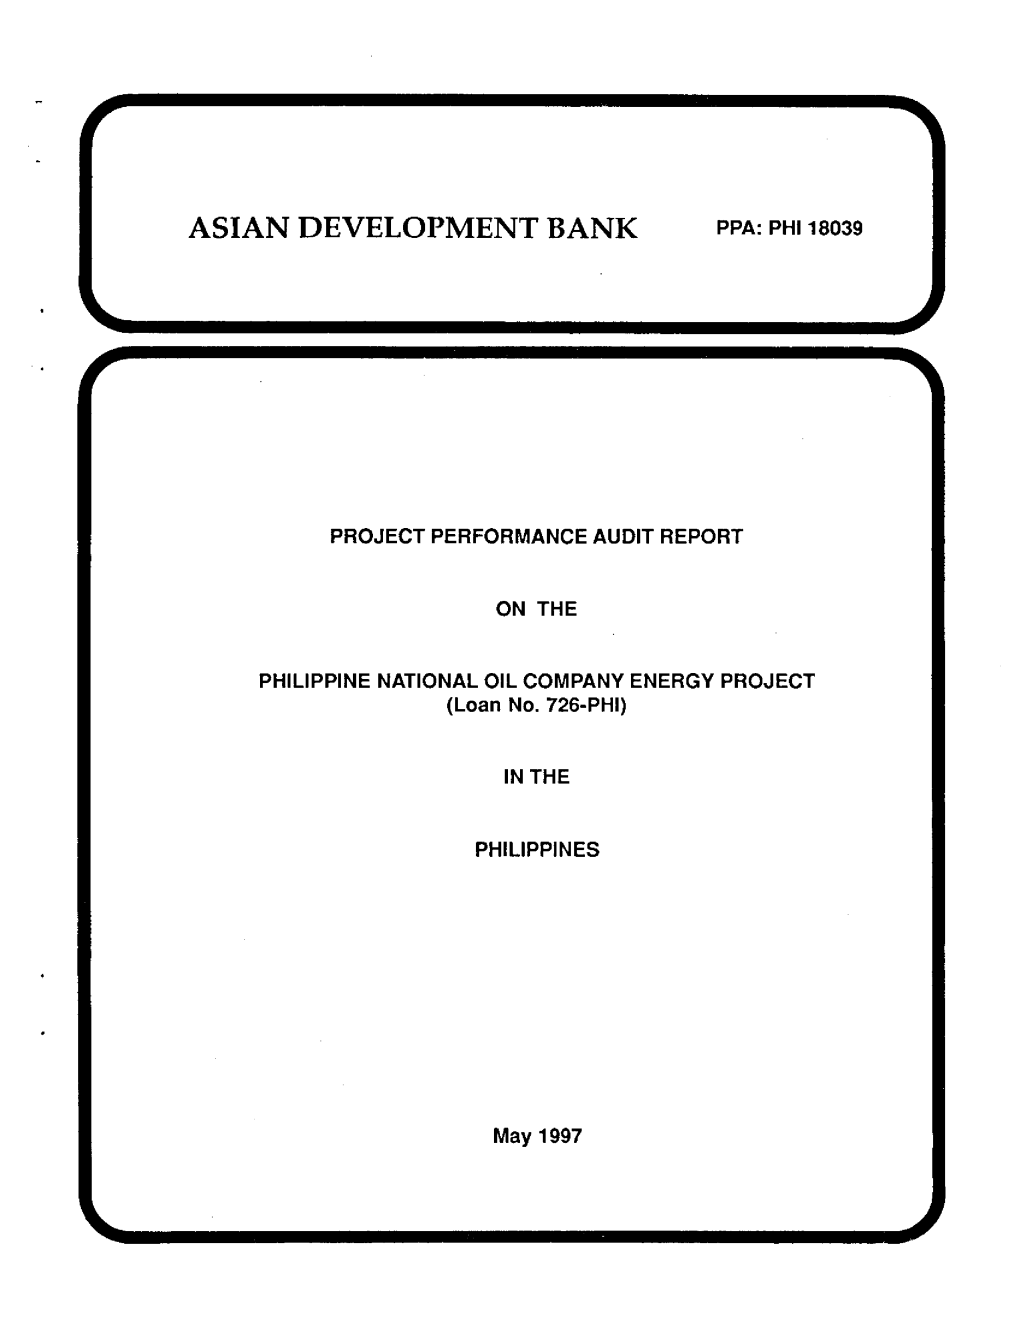 PHILIPPINE NATIONAL OIL COMPANY ENERGY PROJECT (Loan No